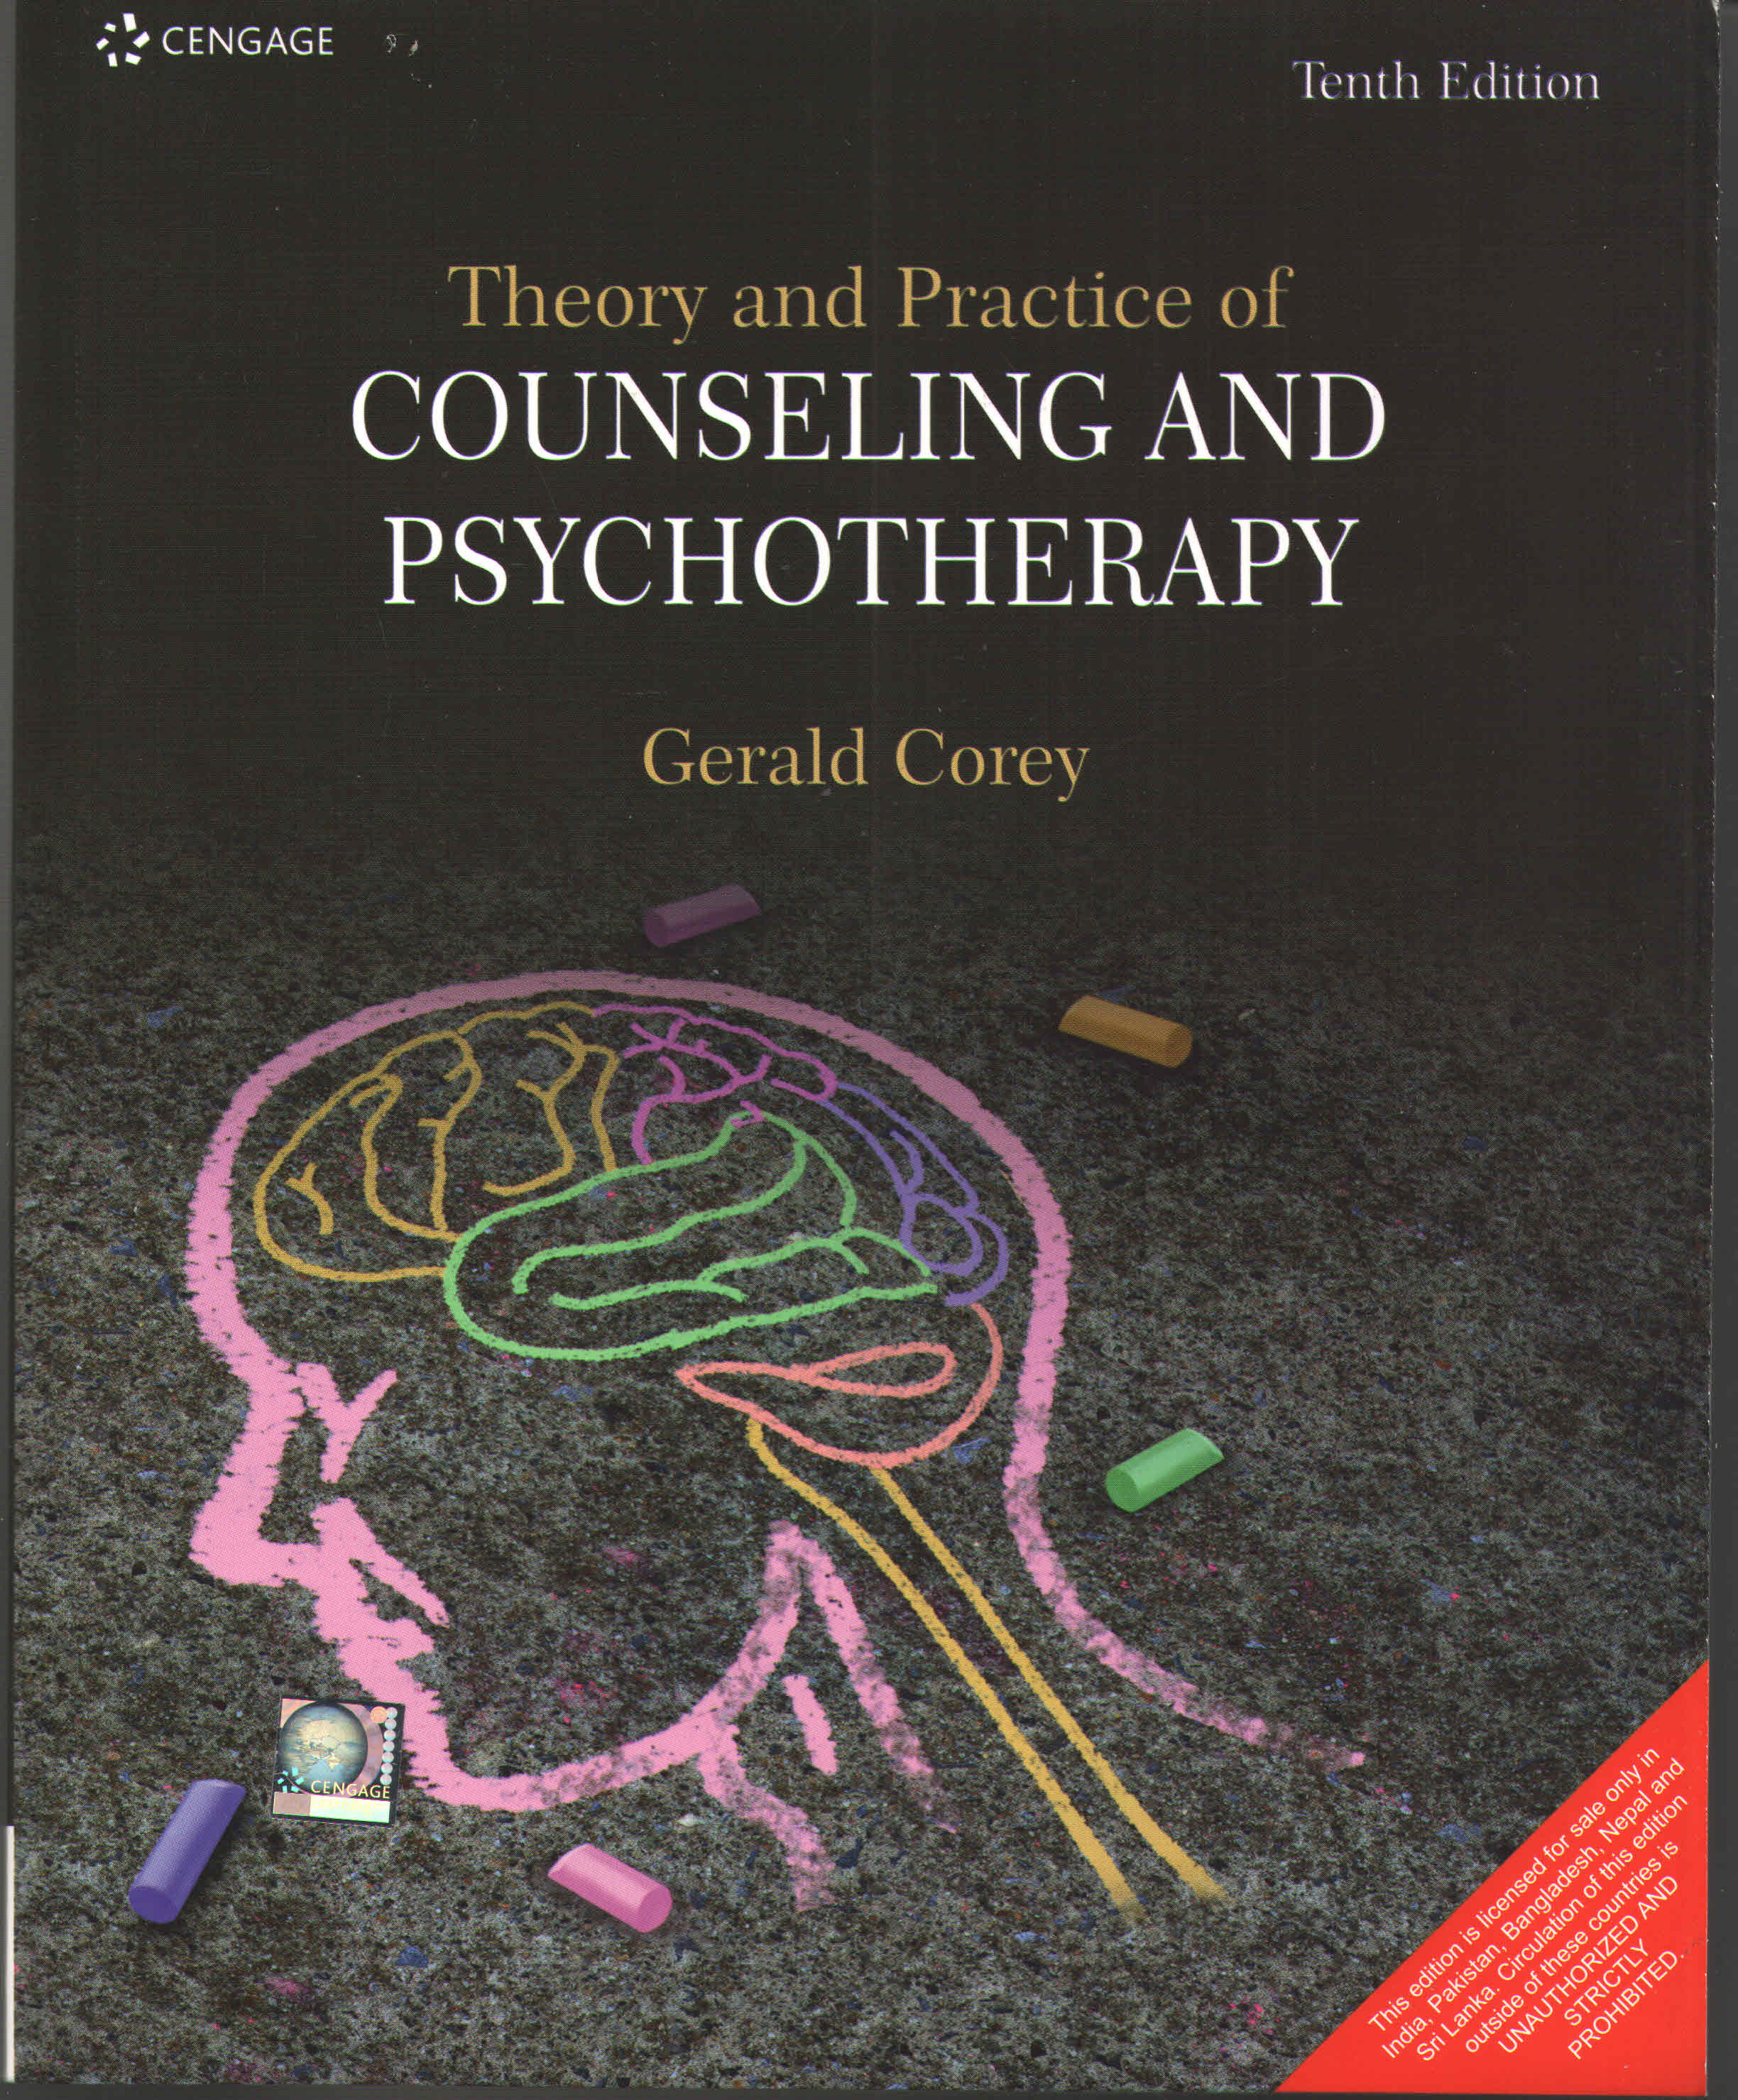 Theory-and-Practice-of-Counseling-and-Psychotherapy-Gerald-Corey